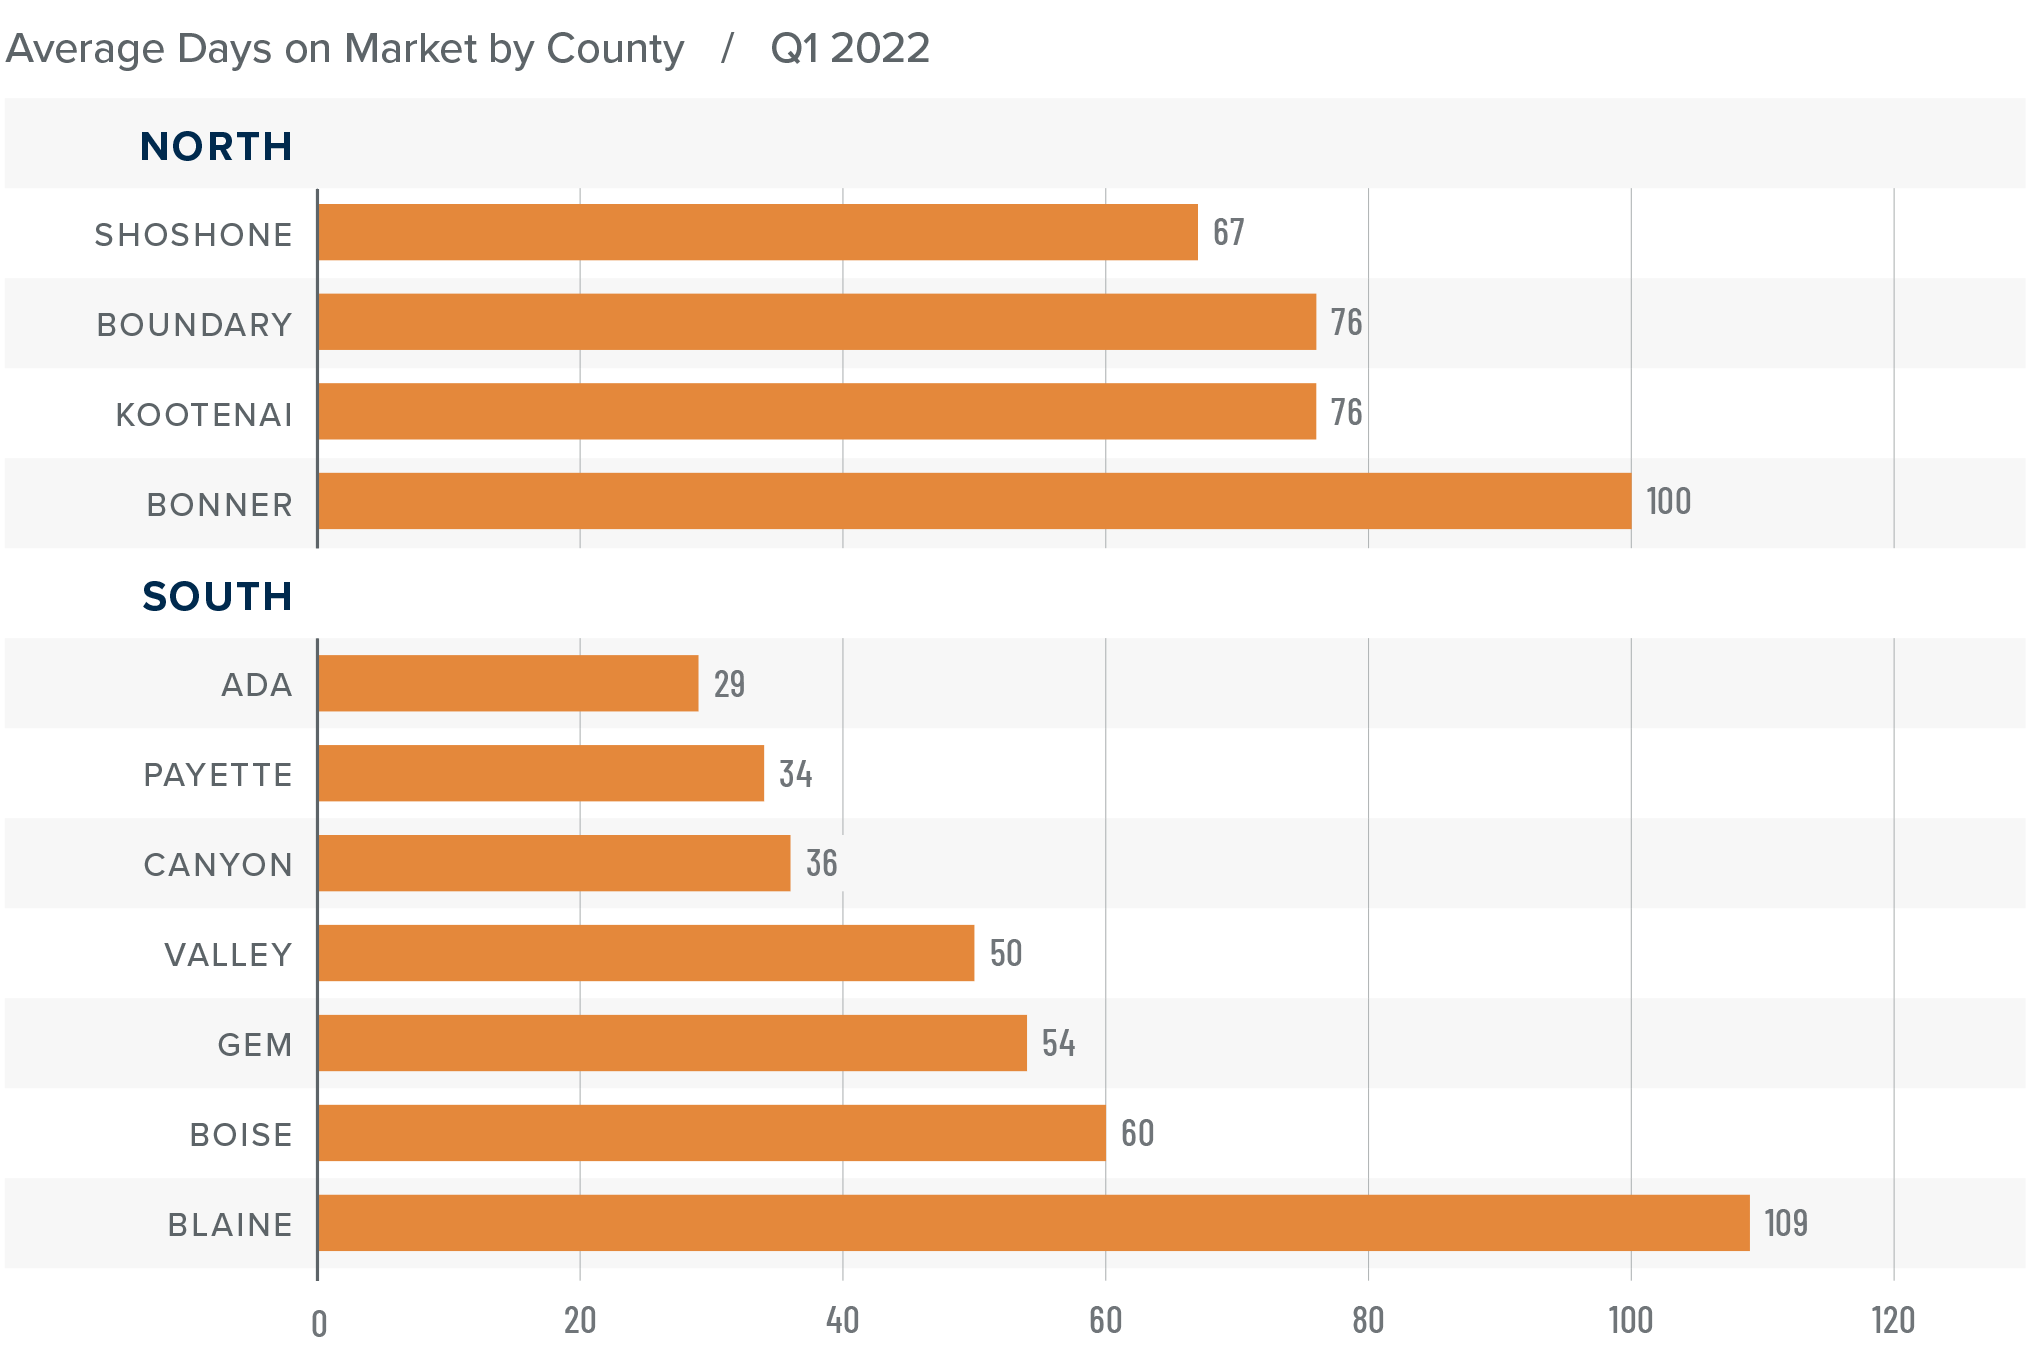 A bar graph showing the average days on market for homes in various counties in Idaho during Q1 2022.